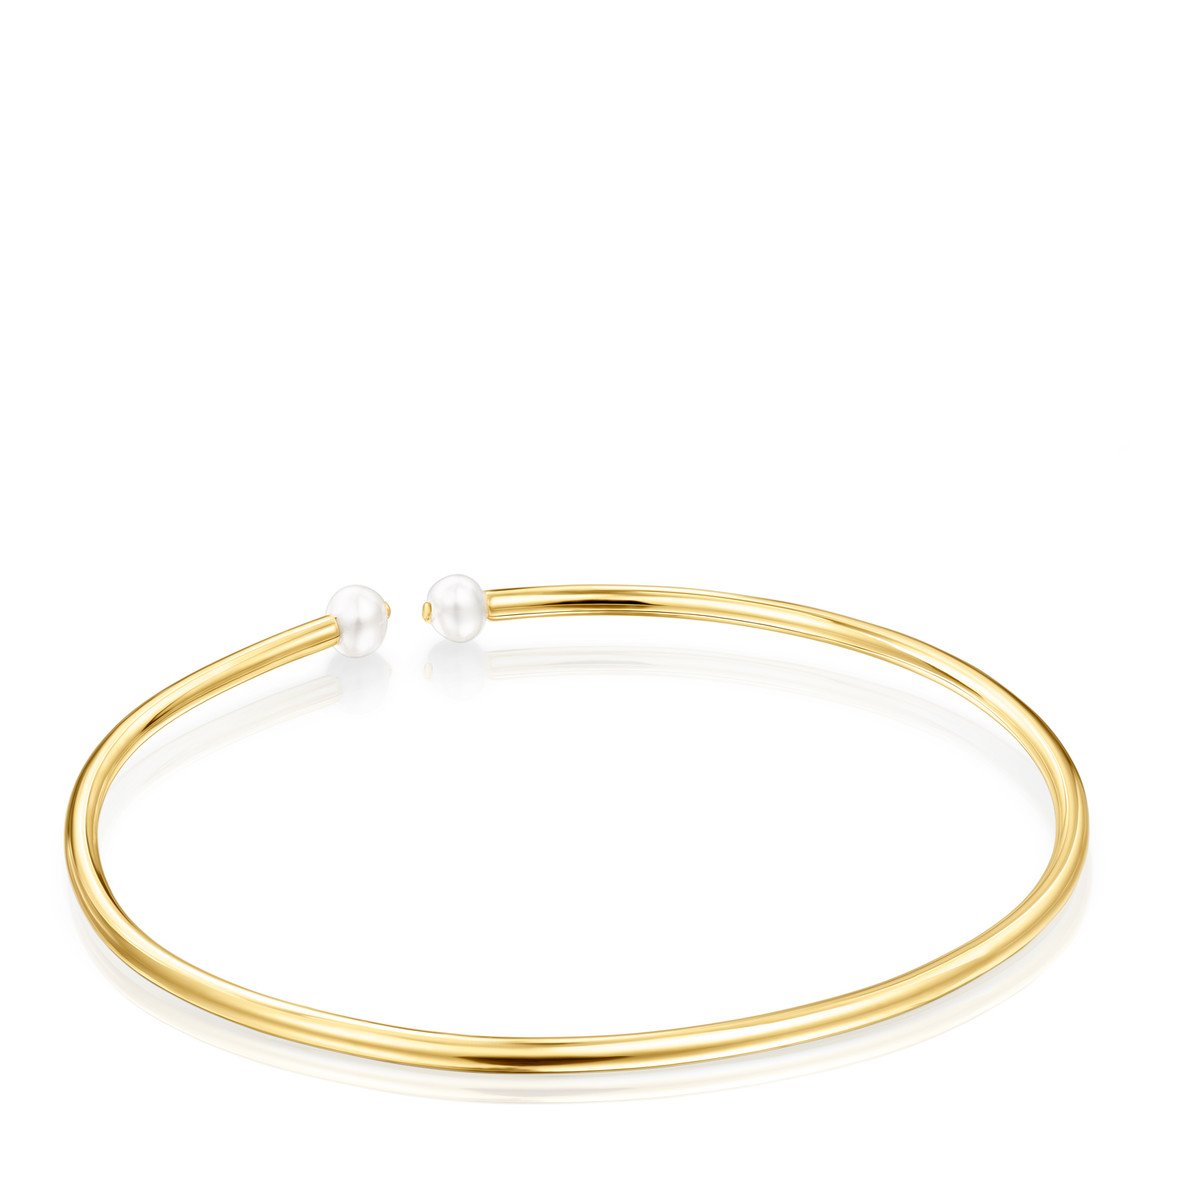 Tous Batala Bracelet in Gold Vermeil with Pearl 918541570